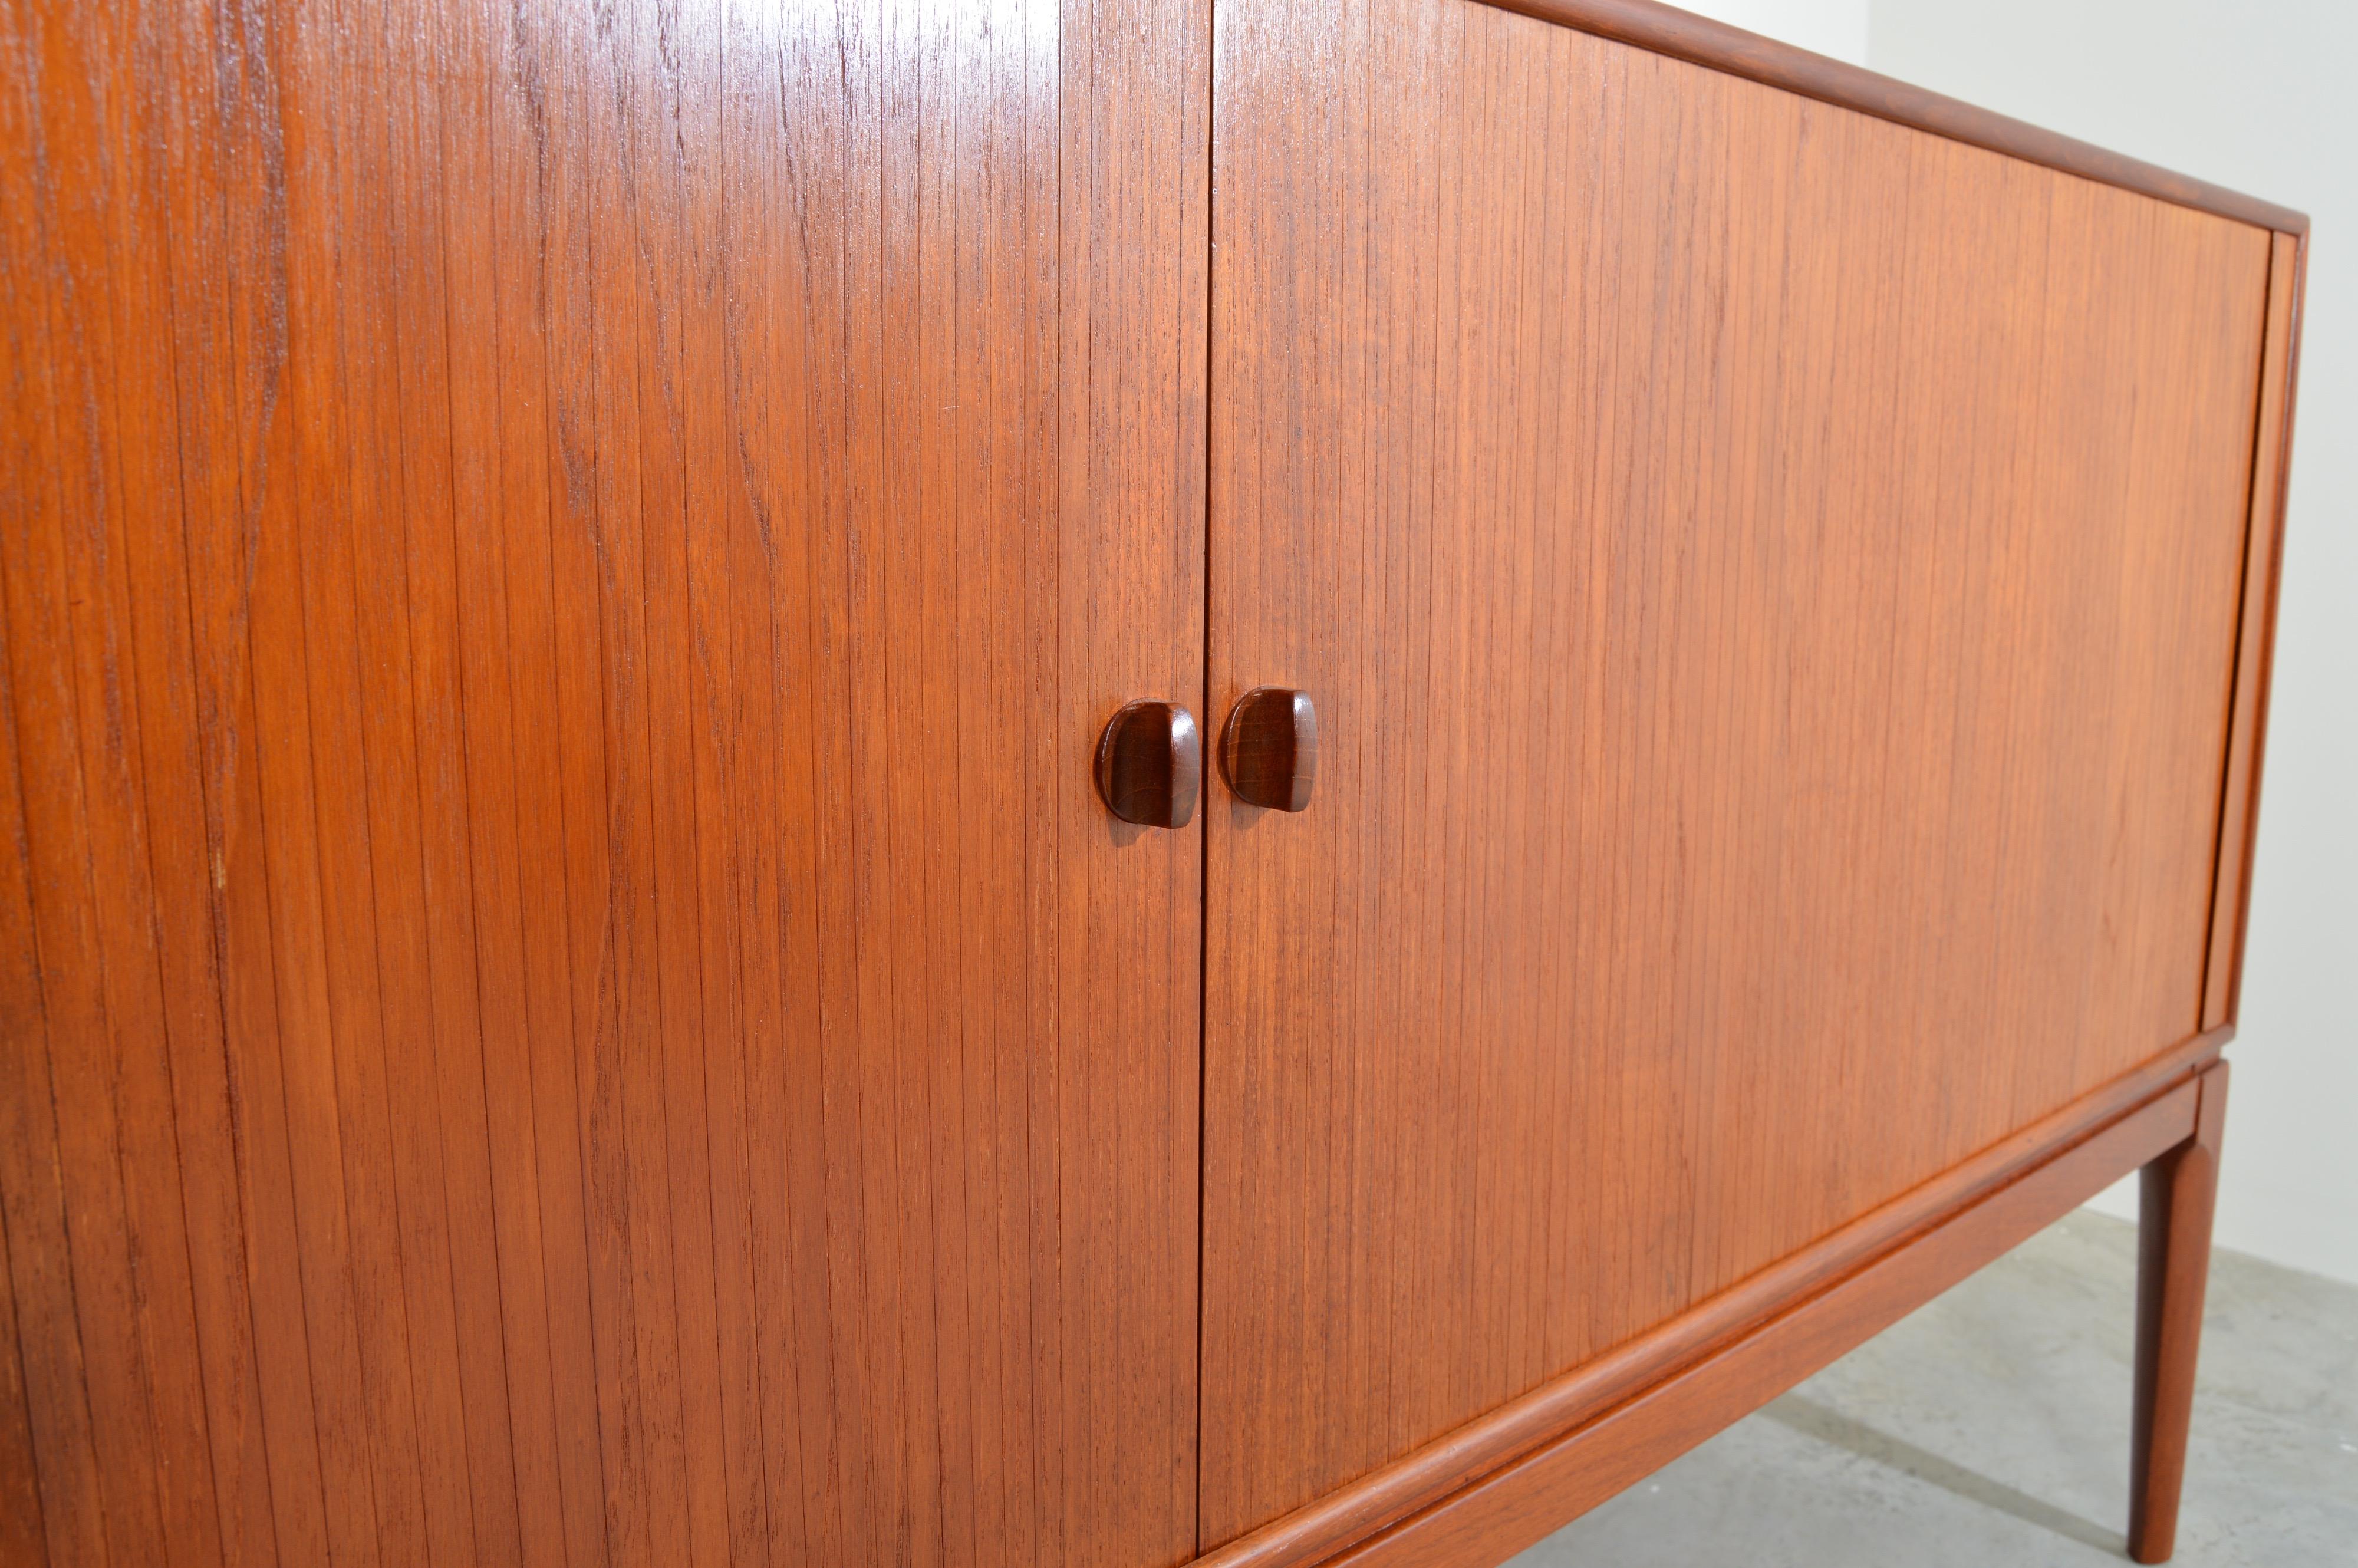 Rare and beautiful Tambour credenza having high legs designed by Peter Hvidt & Orla Molgaard-Nielsen. 
Ample center drawer and case storage.
Beautiful, well maintained condition. Clean and ready for use!